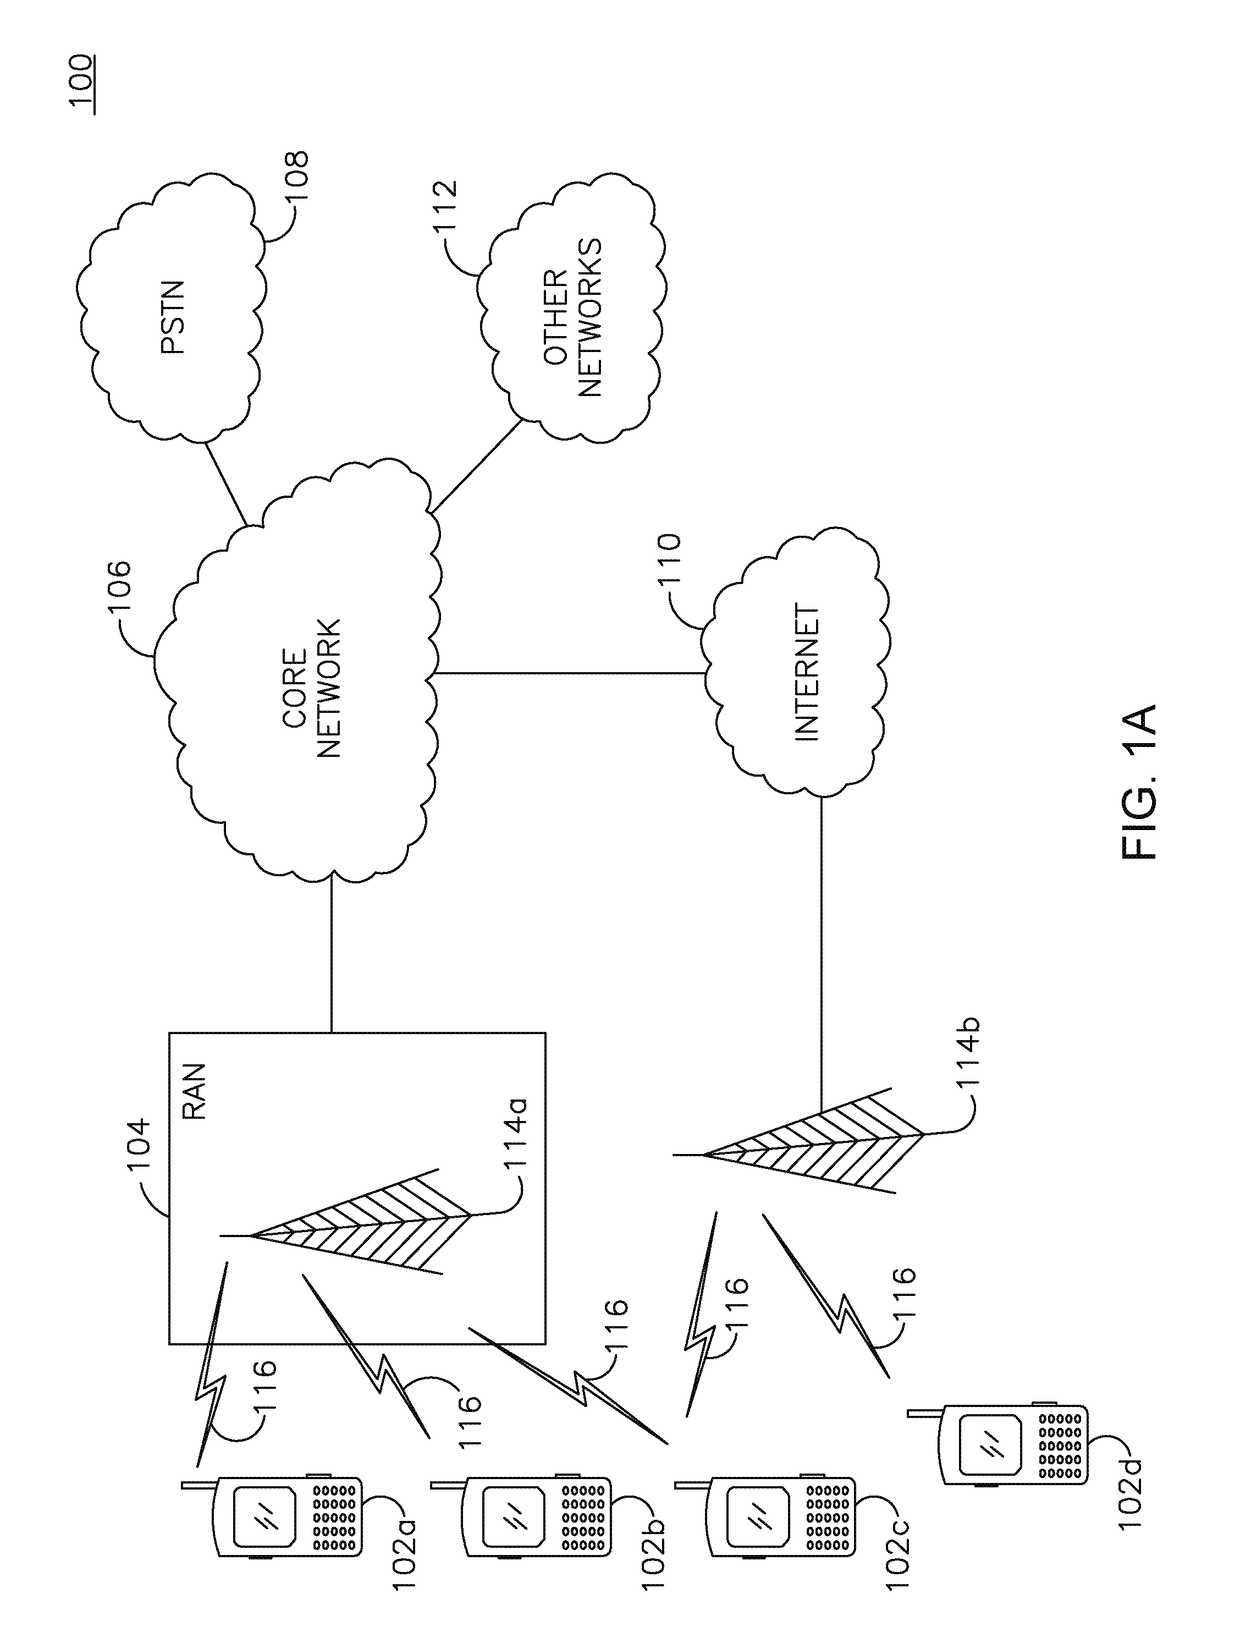 Multi-user parallel channel access in WLAN systems